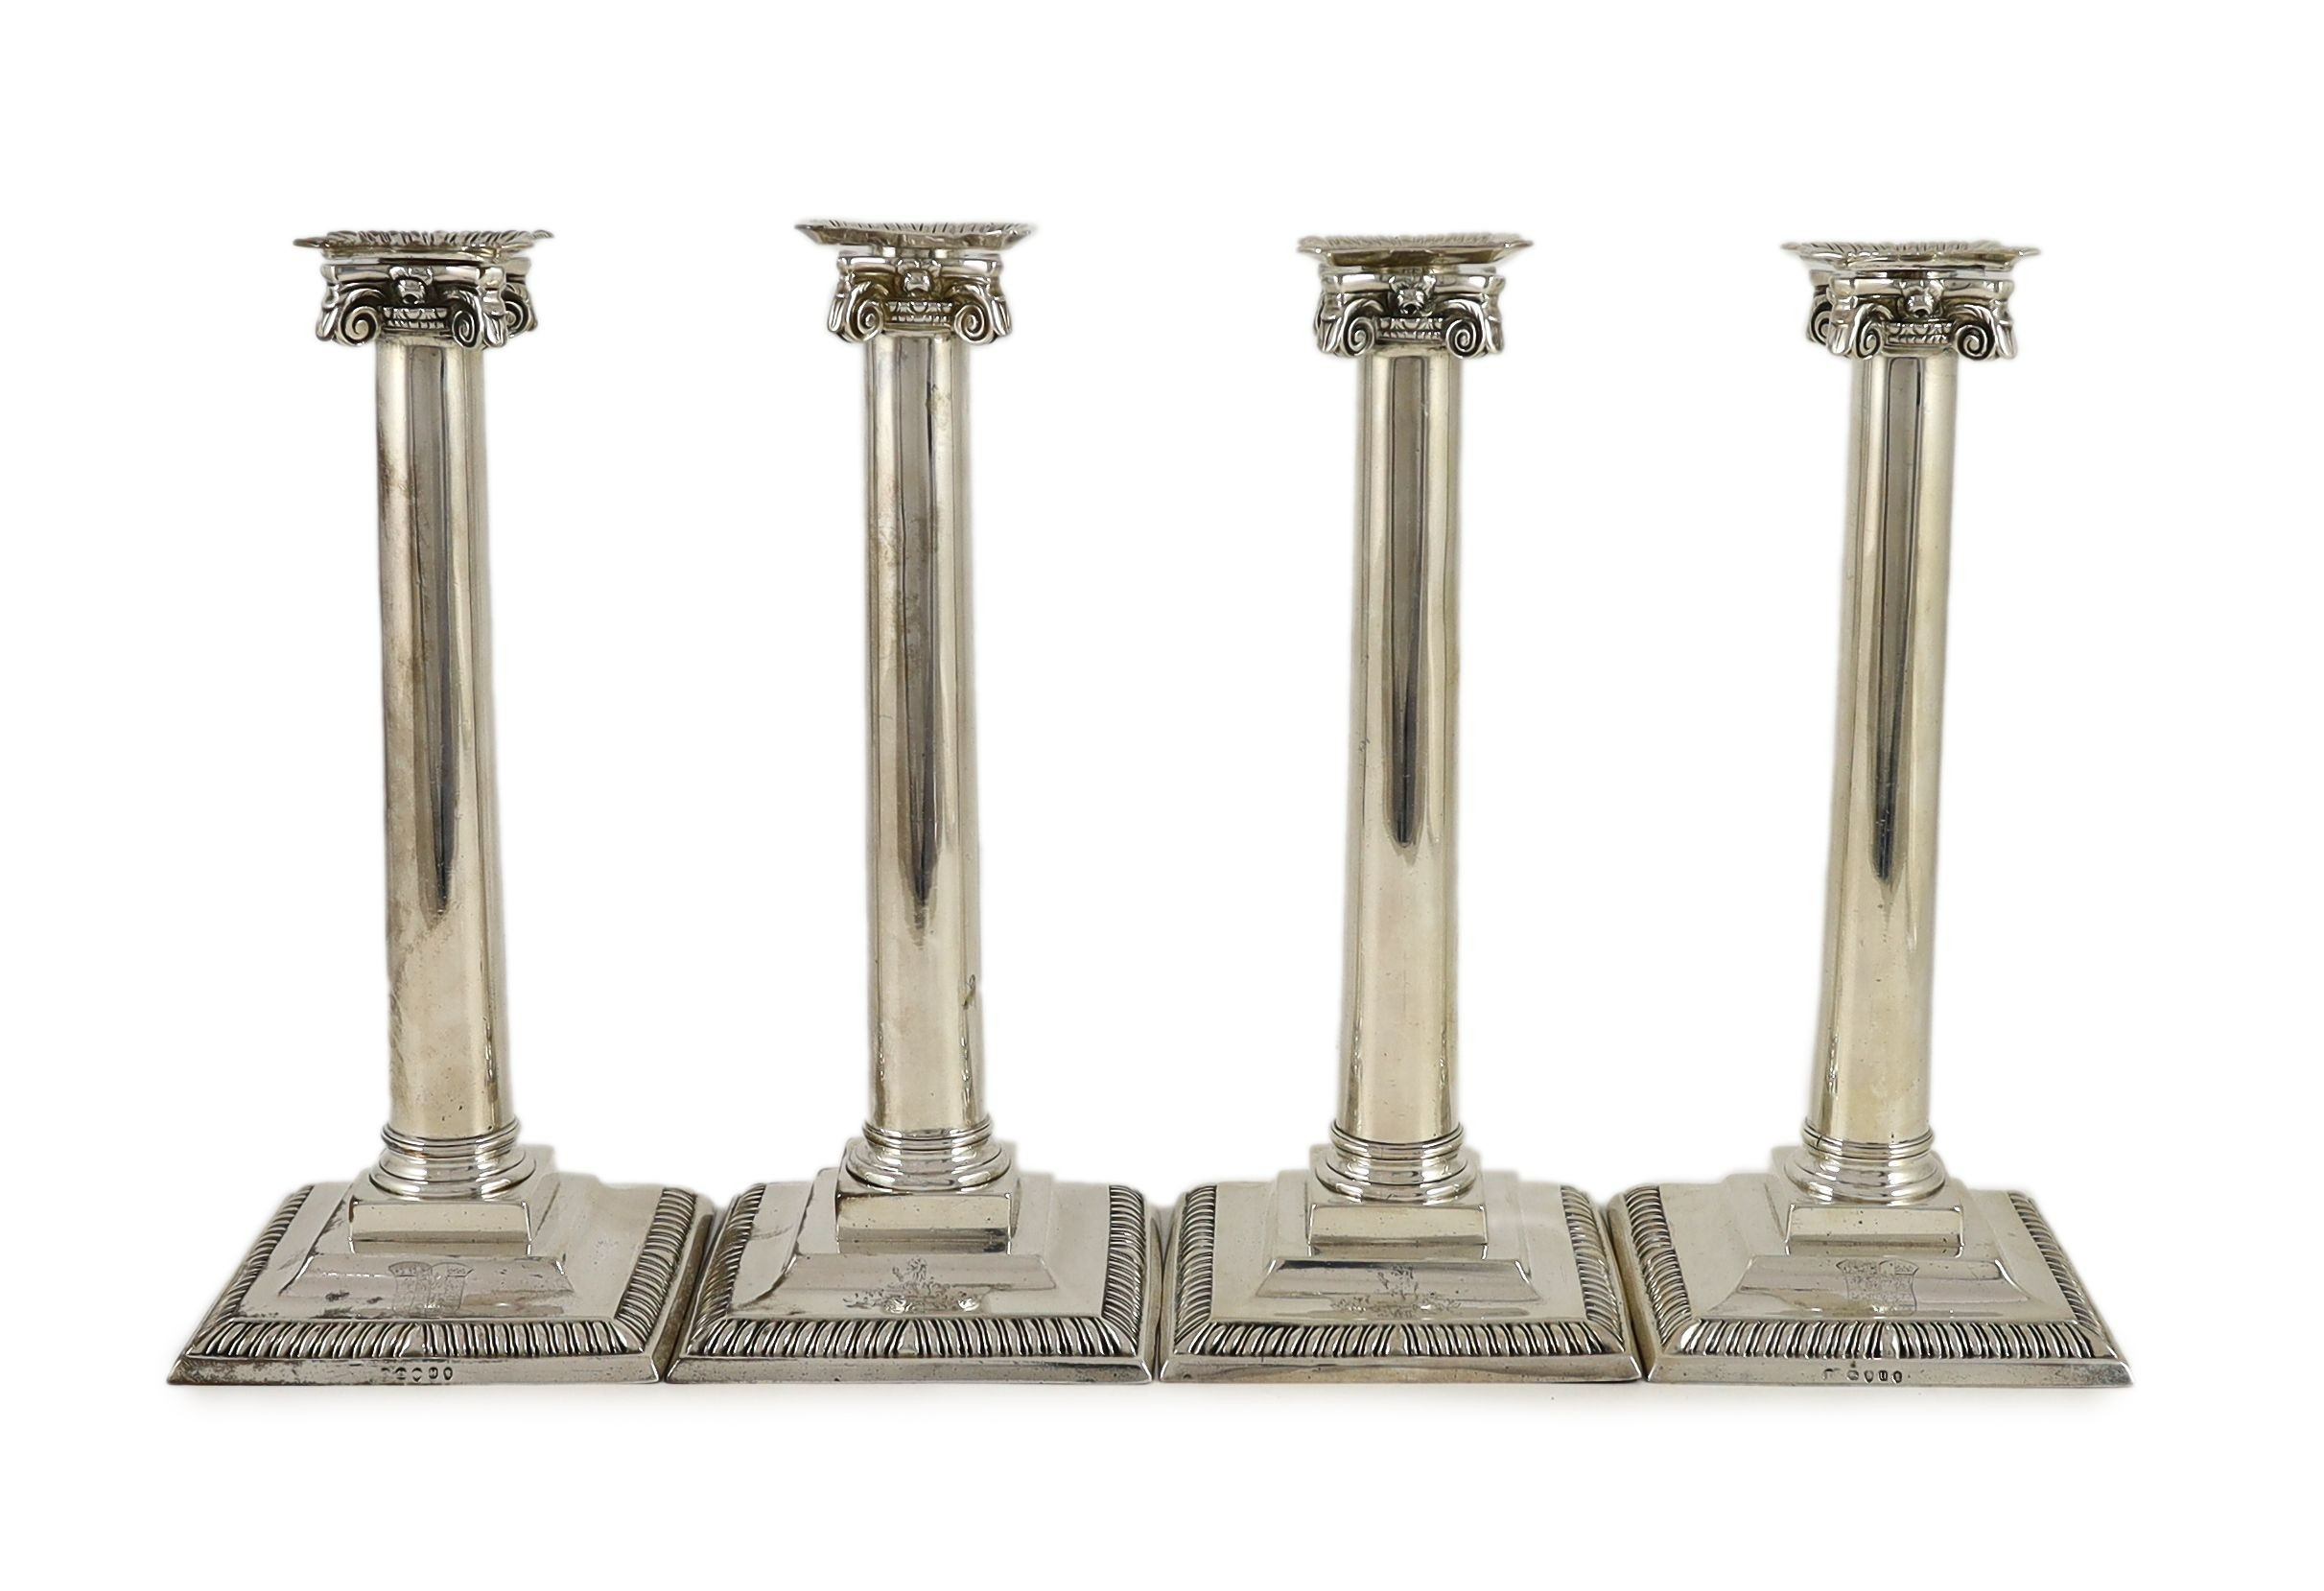 A set of three George III Corinthian silver ionic column candlesticks, by Thomas Shephard? London, 1795 and one other matched candlestick, Smith & Sharp, London, 1786                                                      